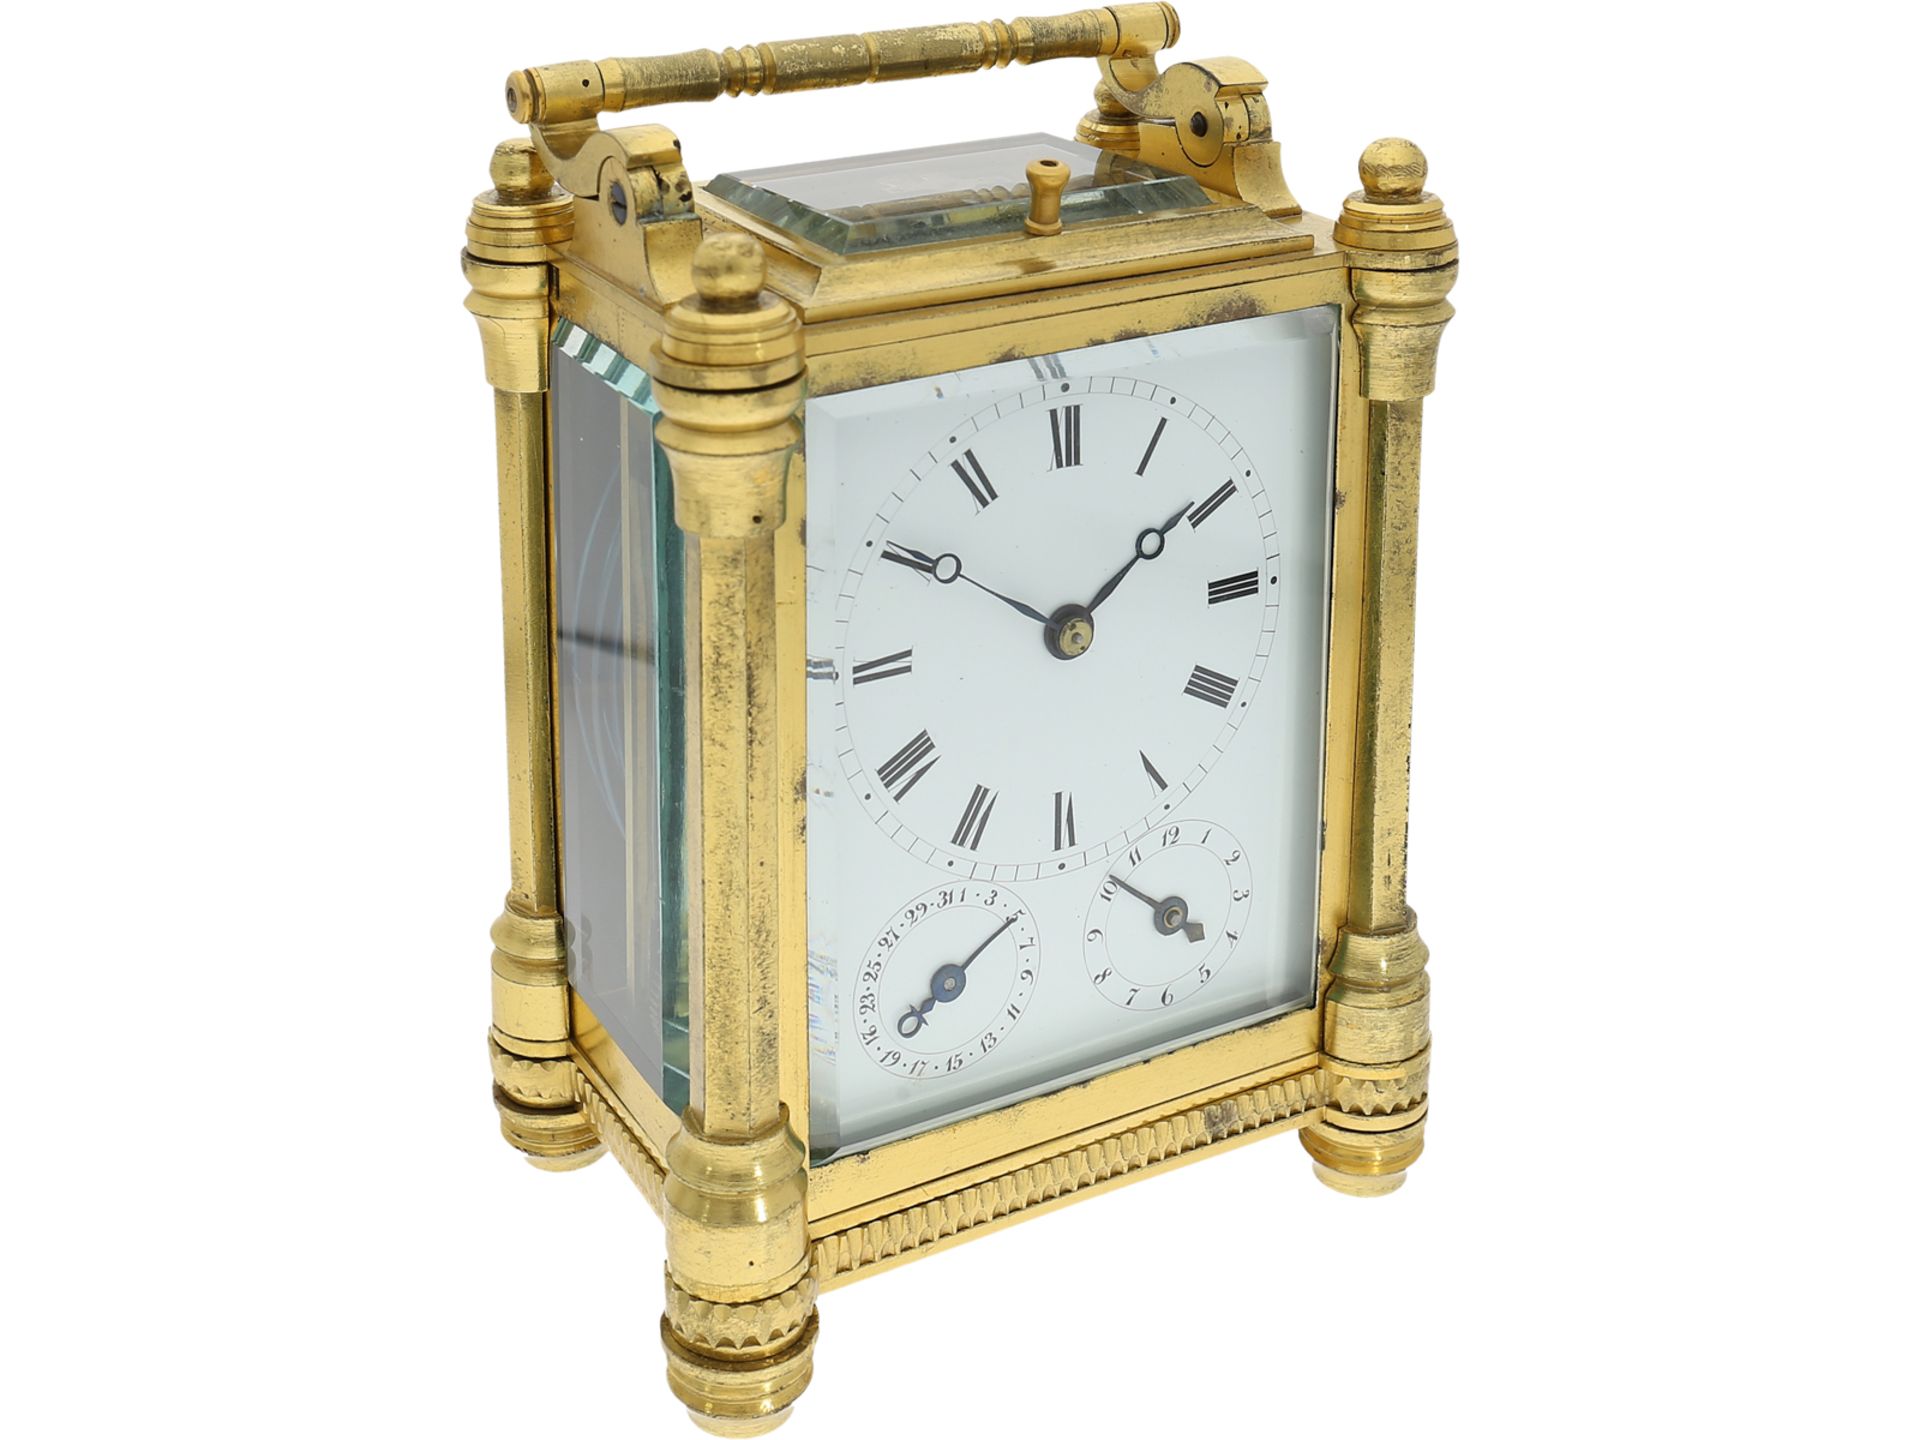 Travel clock: highly complicated, technically interesting travel clock with 4 complications, 19th ce - Image 2 of 6